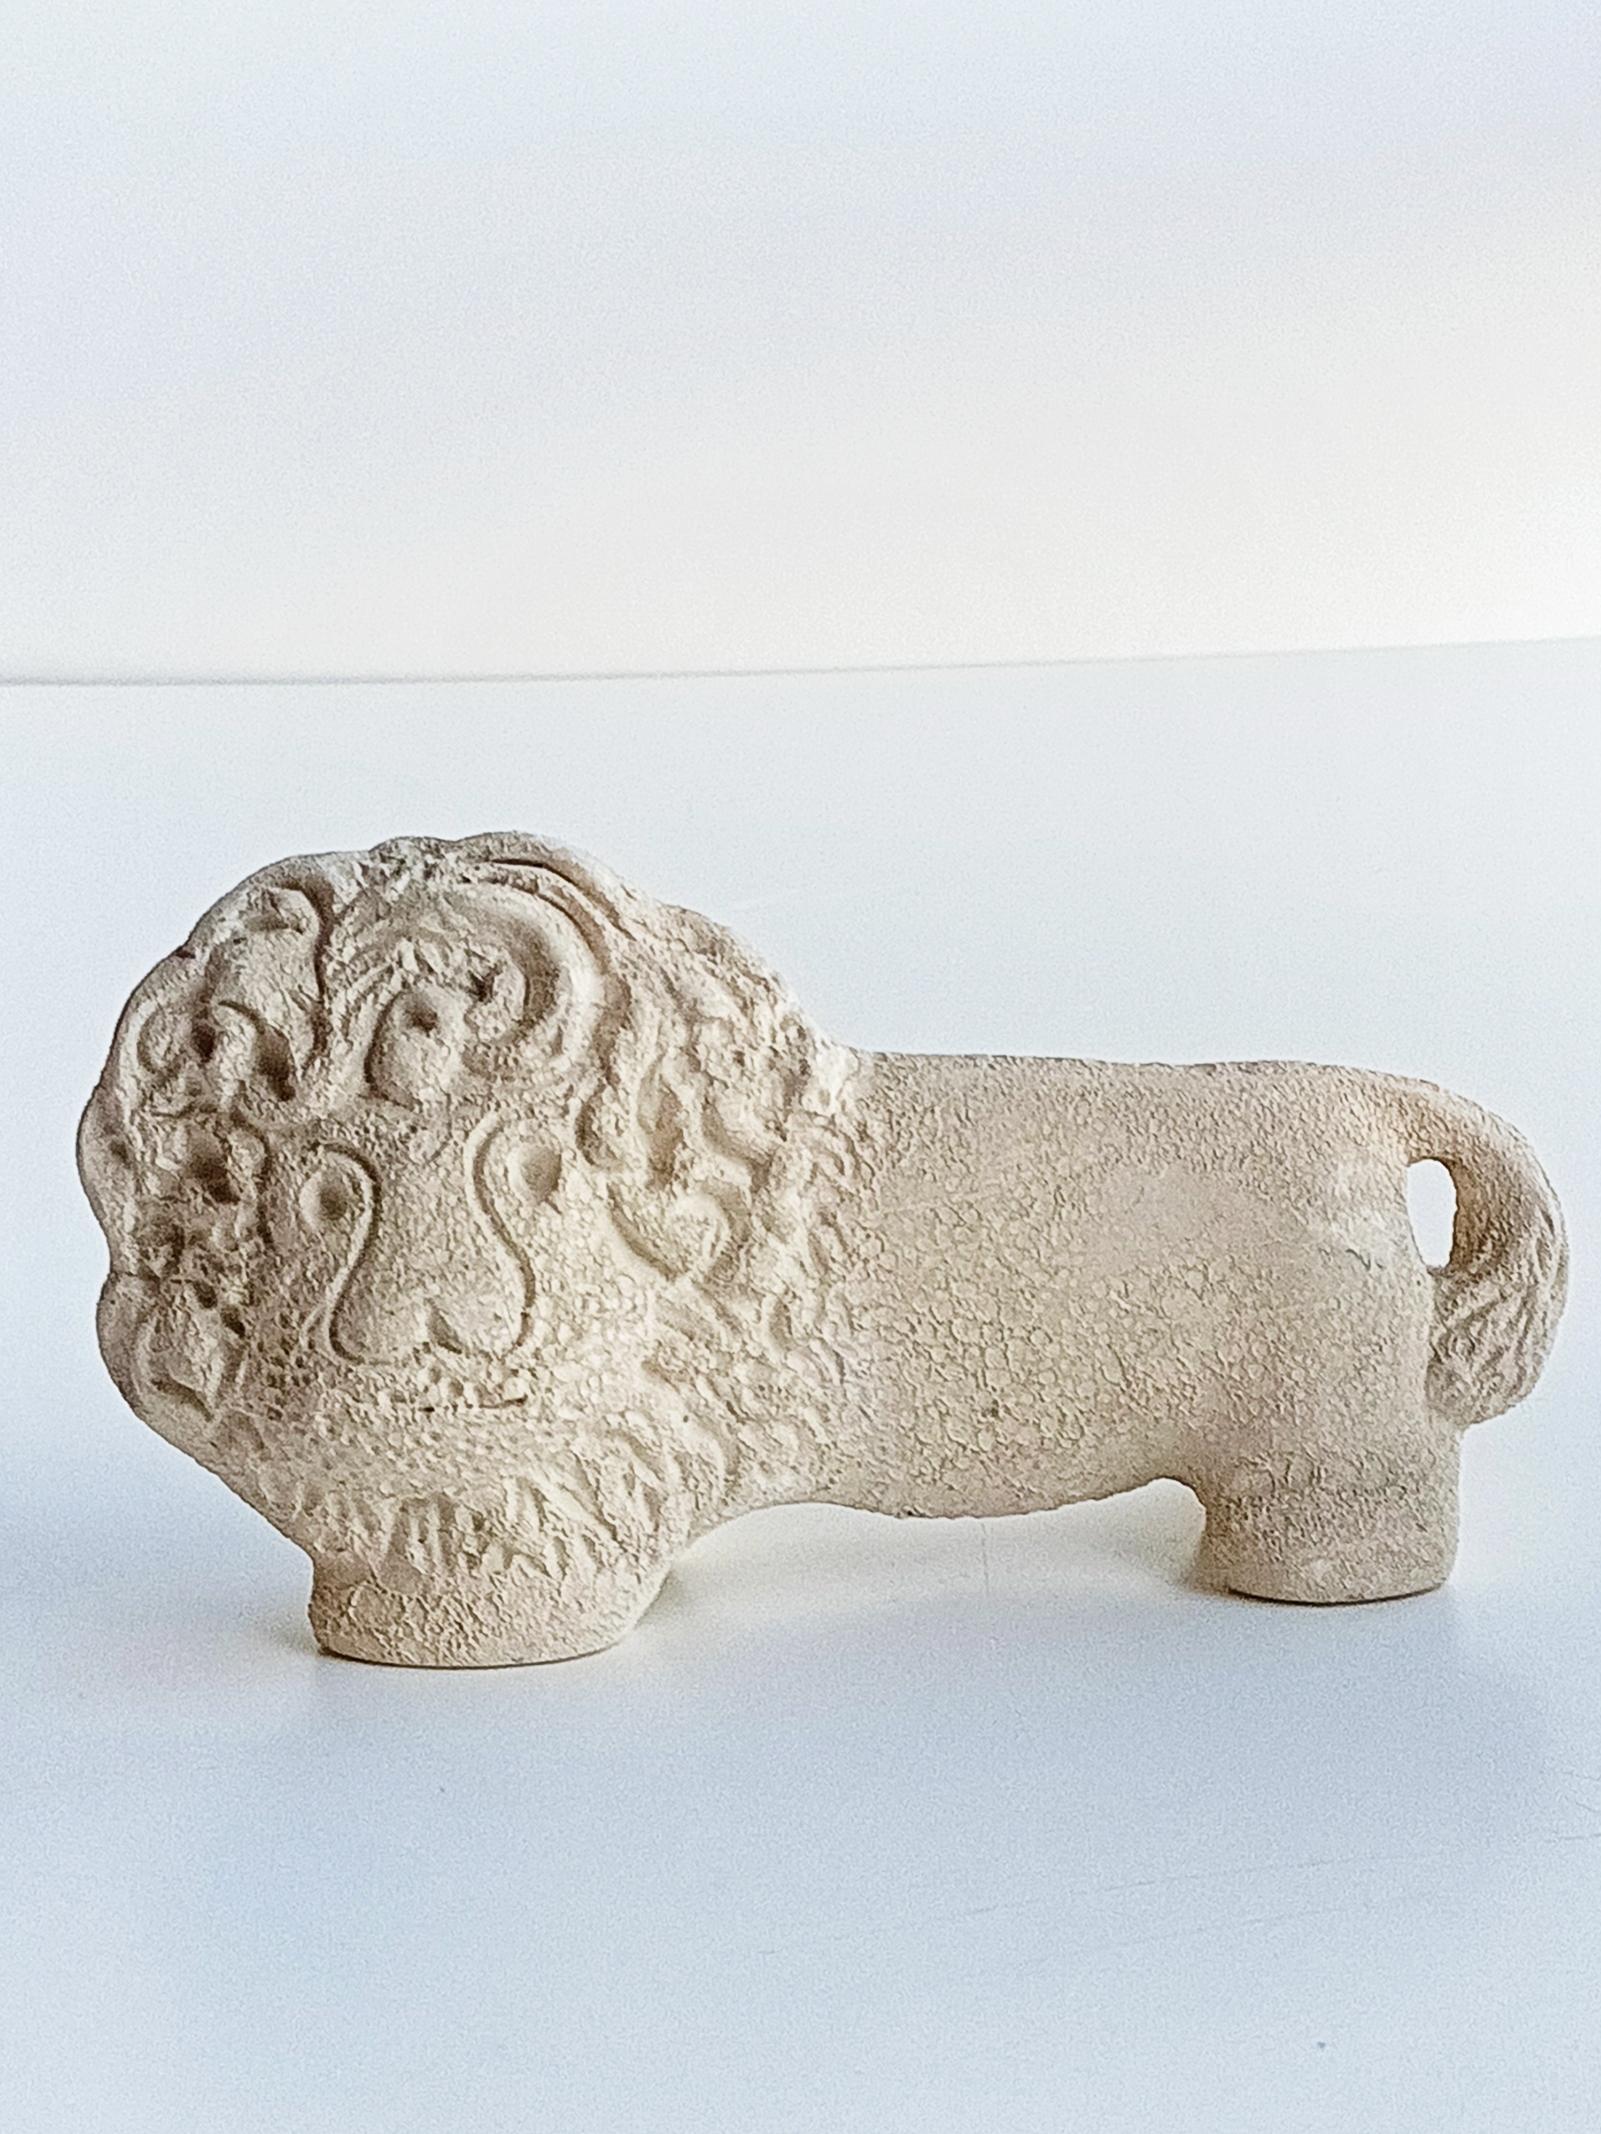 This lion sculpture is indeed a stunning example of Aldo Londi's work for Bitossi Ceramiche. The use of light cream clay with a stone resemblance suggests a sophisticated and classical aesthetic, reminiscent of ancient Roman art and architecture.